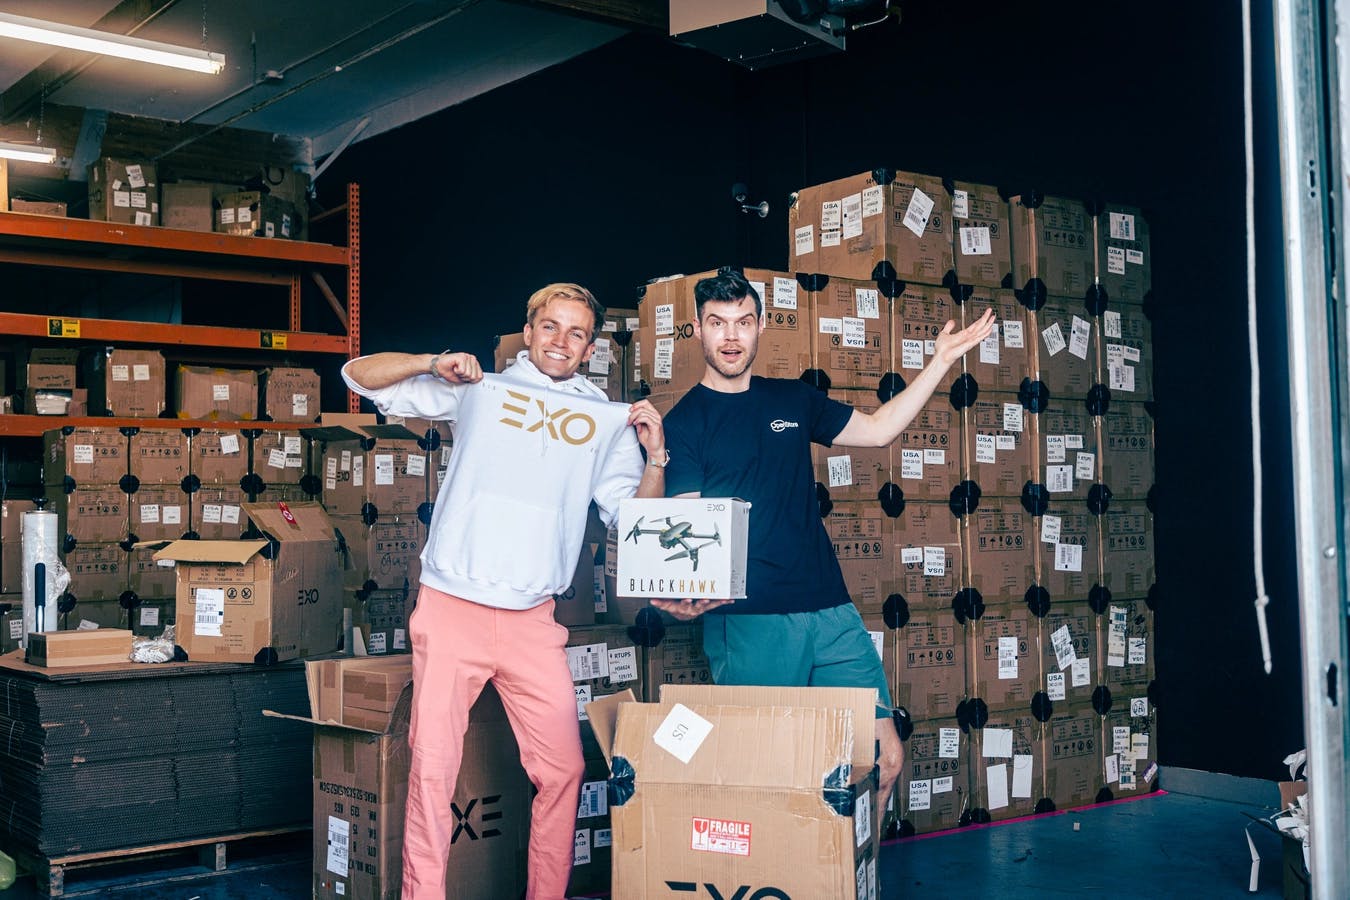 Exo Drones founder Charlie Cannon transferring his inventory to OpenStore's Merchant & Acquisitions Lead Brian Quimby post acquisition 